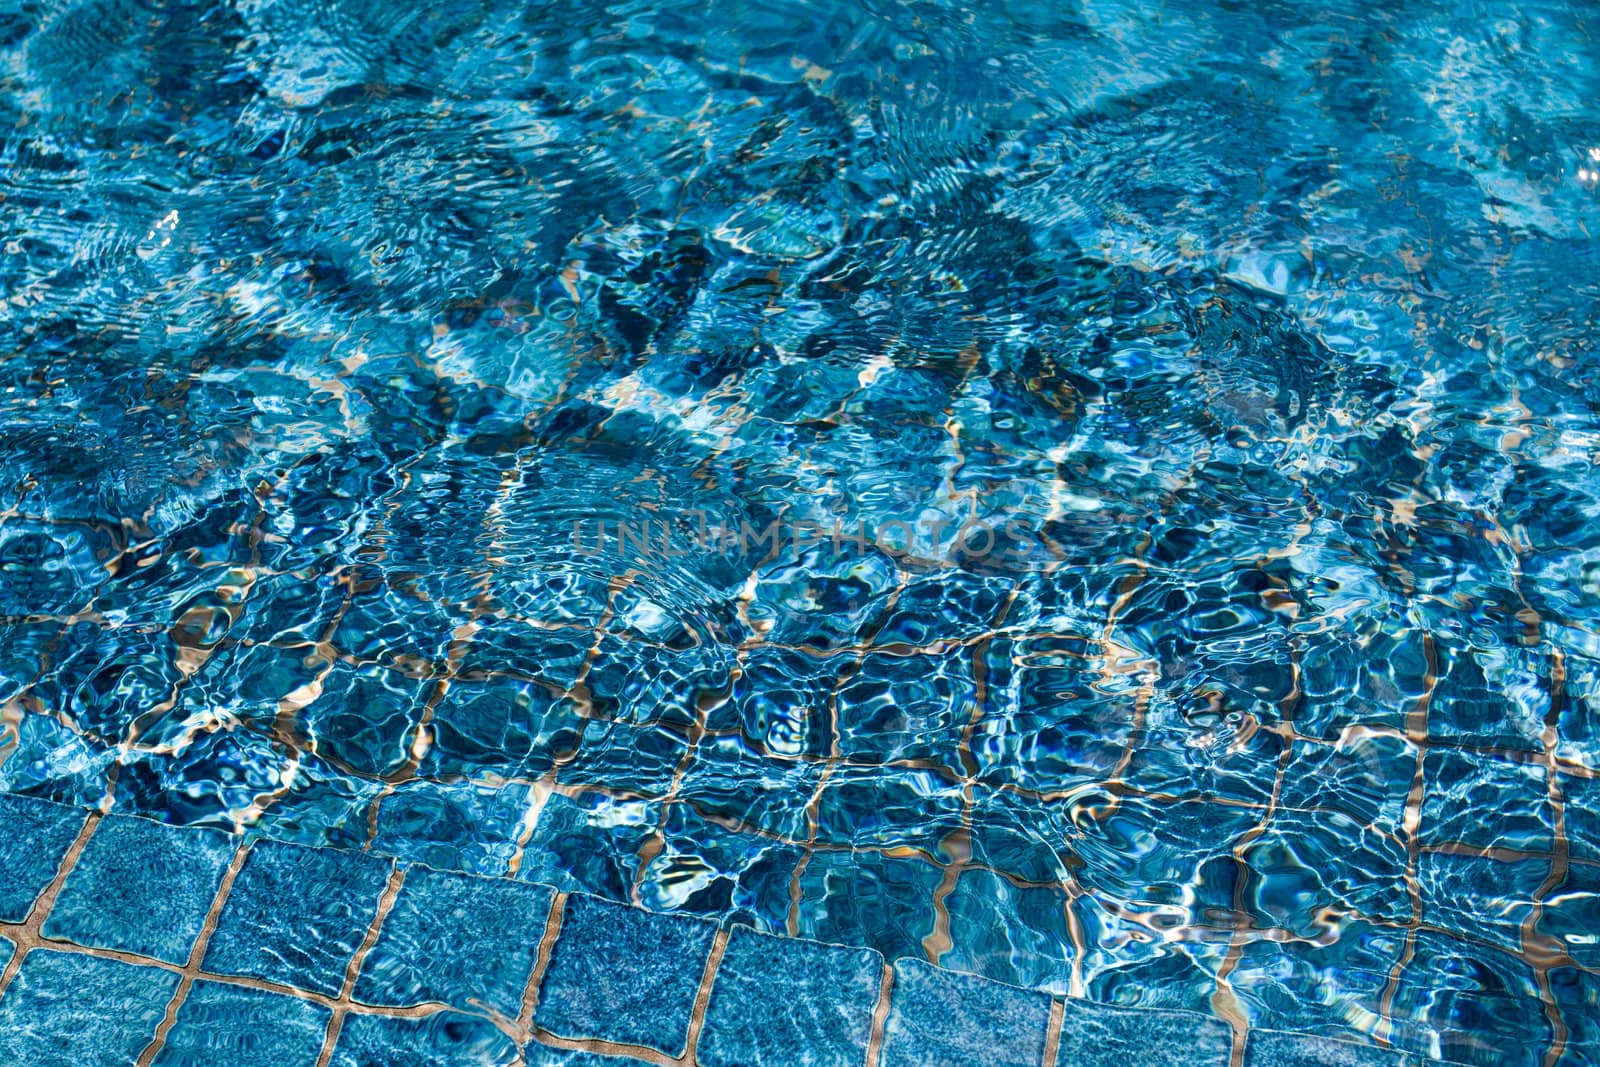 Background of deep blue swimming pool water sparkling in sunlight